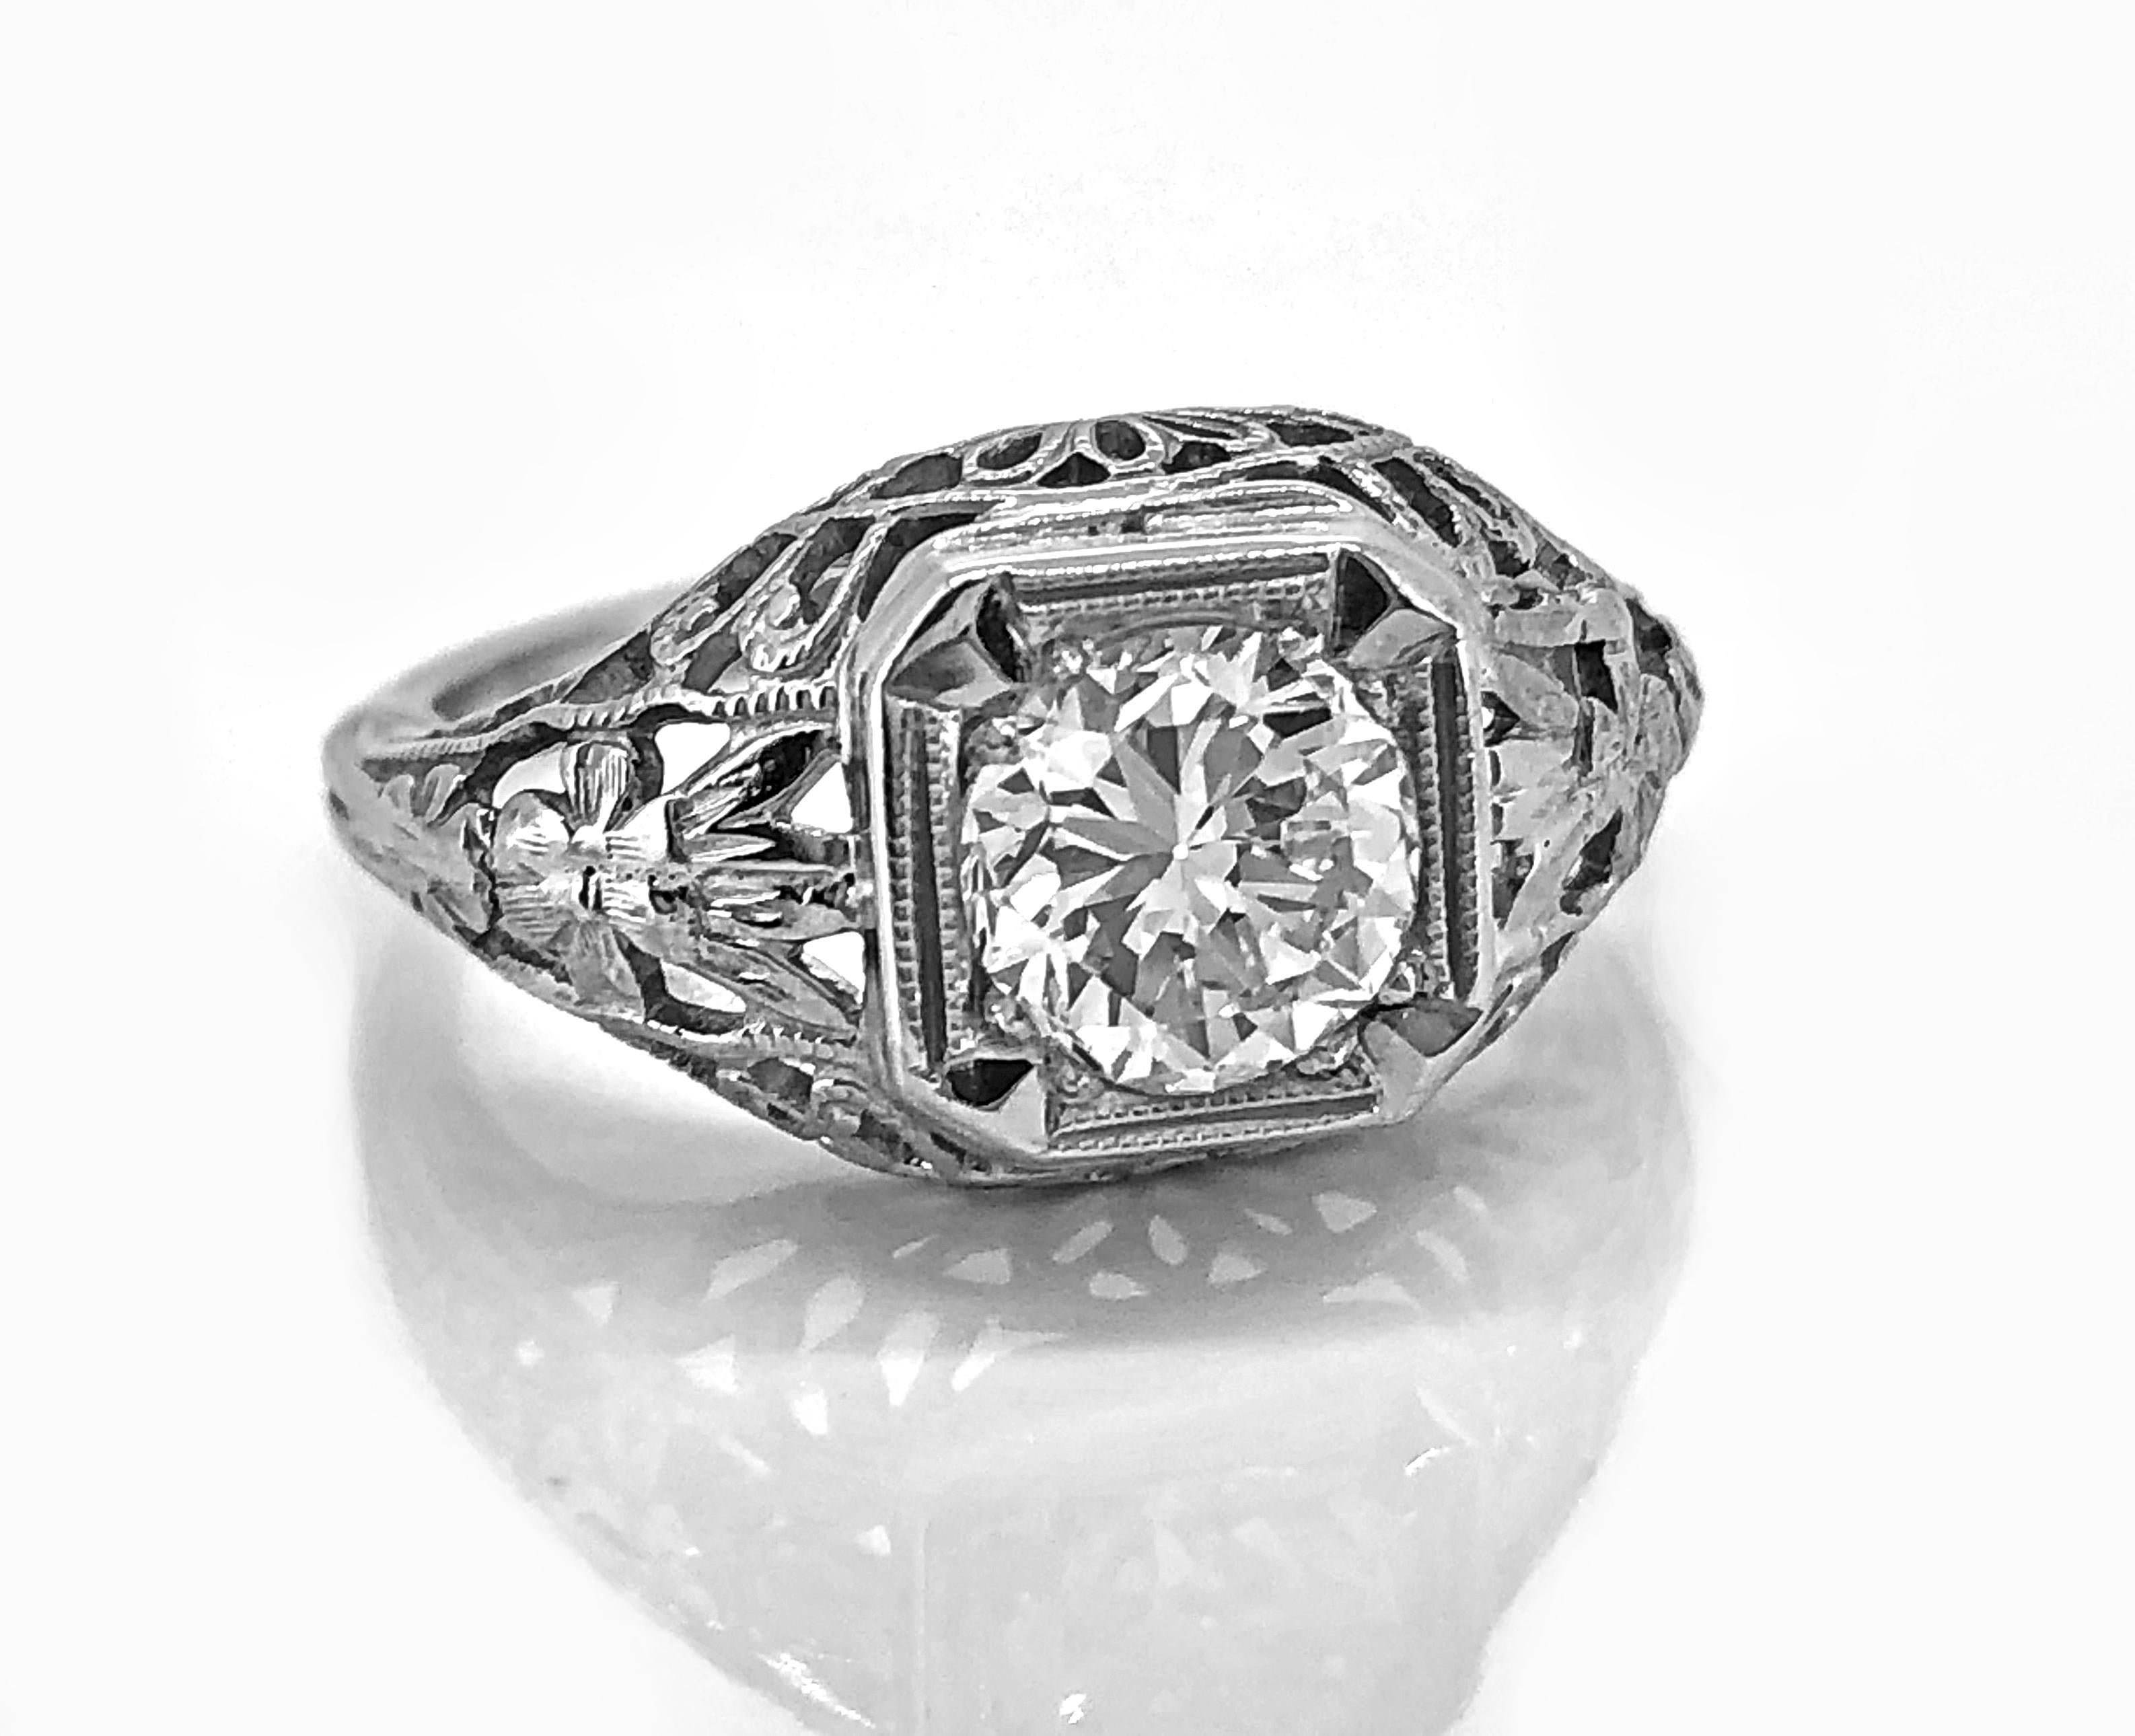 An antique engagement ring crafted in 18K white gold and features a .90ct. apx. center diamond with J color and exceptional VVS1 clarity. It does not get much better than this. The mounting was die struck giving the filigree its crisp design.